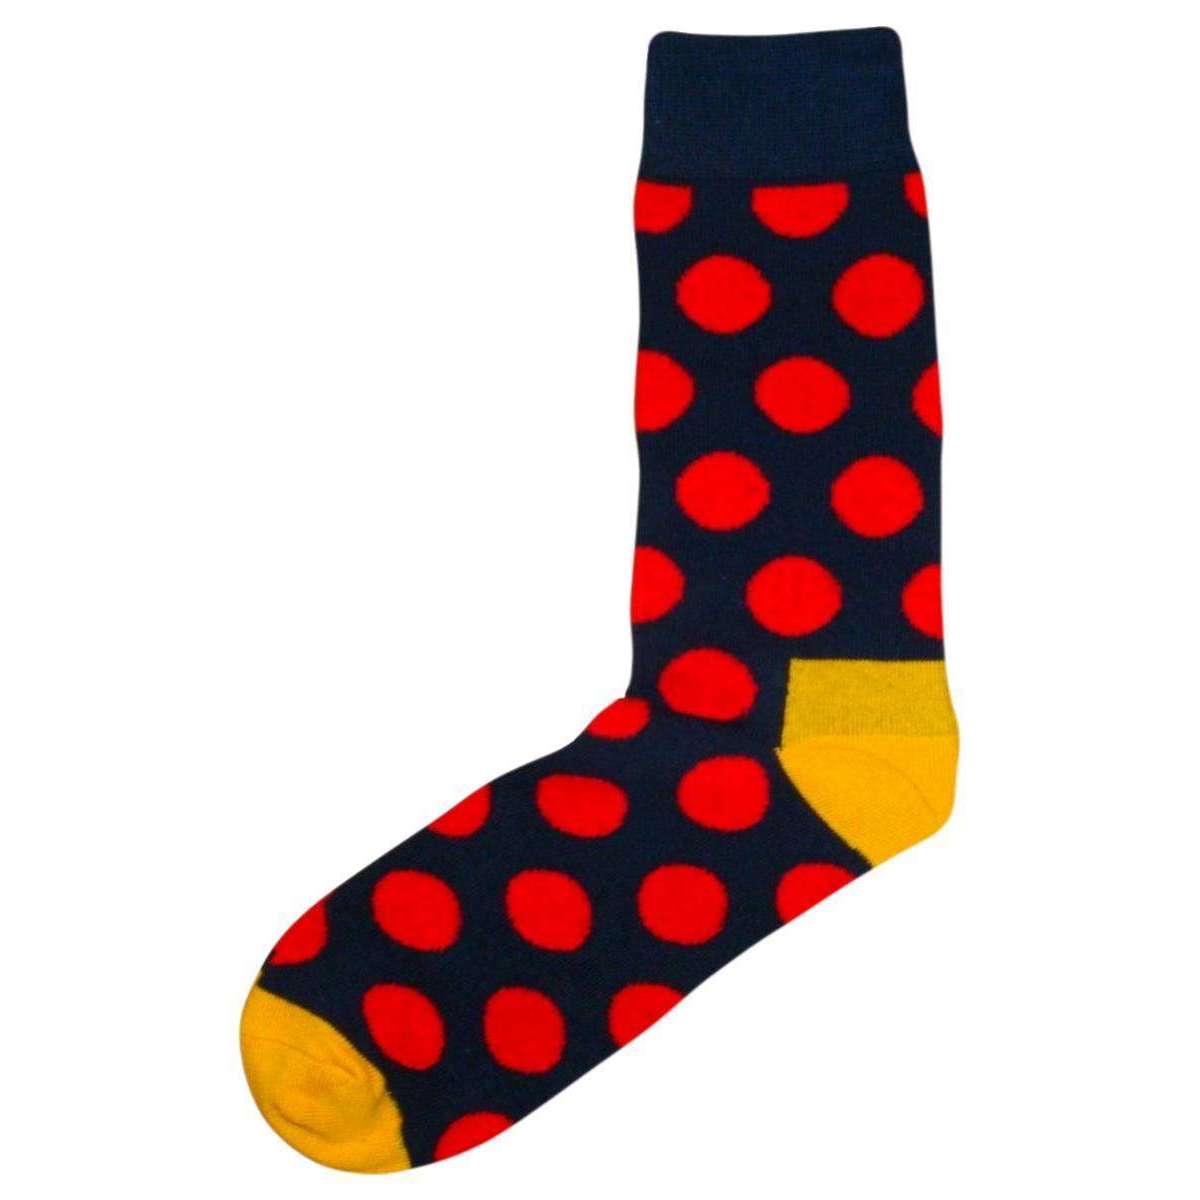 Bassin and Brown Contrast Heel and Toe Spotted Socks - Navy/Red/Yellow